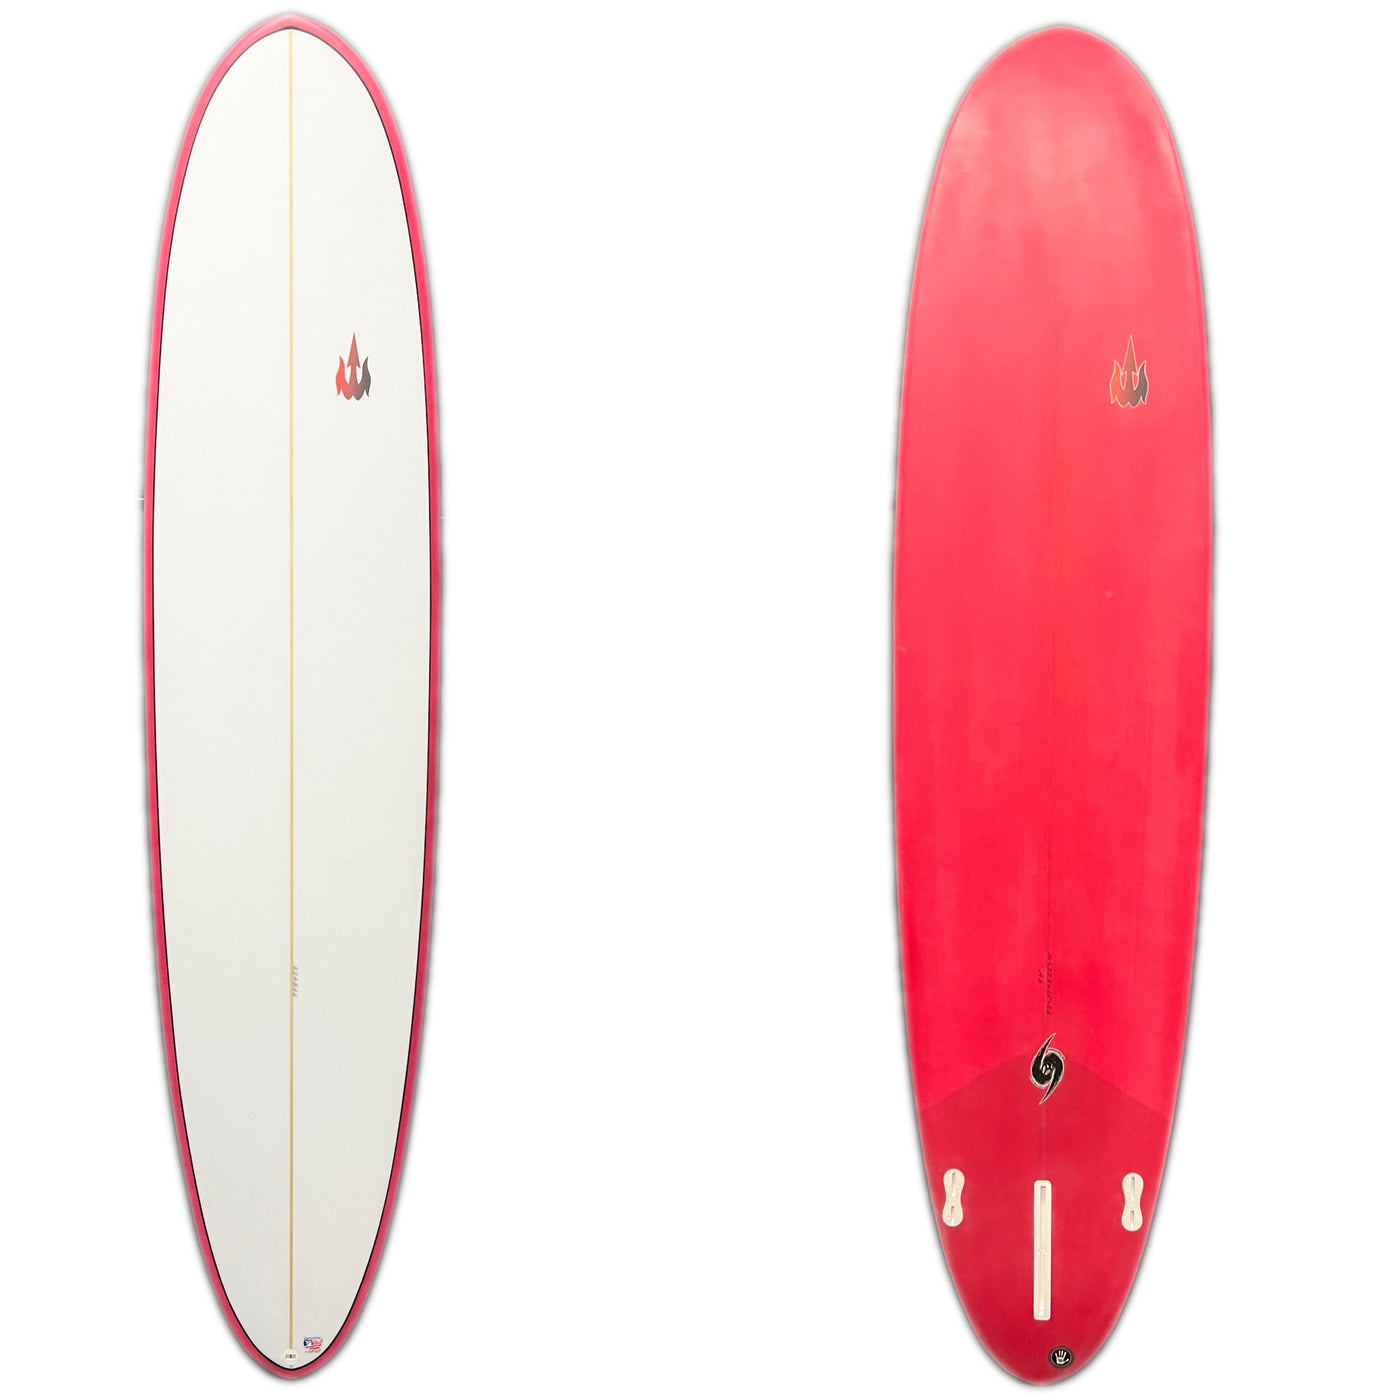 WBZ 8'2" Red Tint Funboard